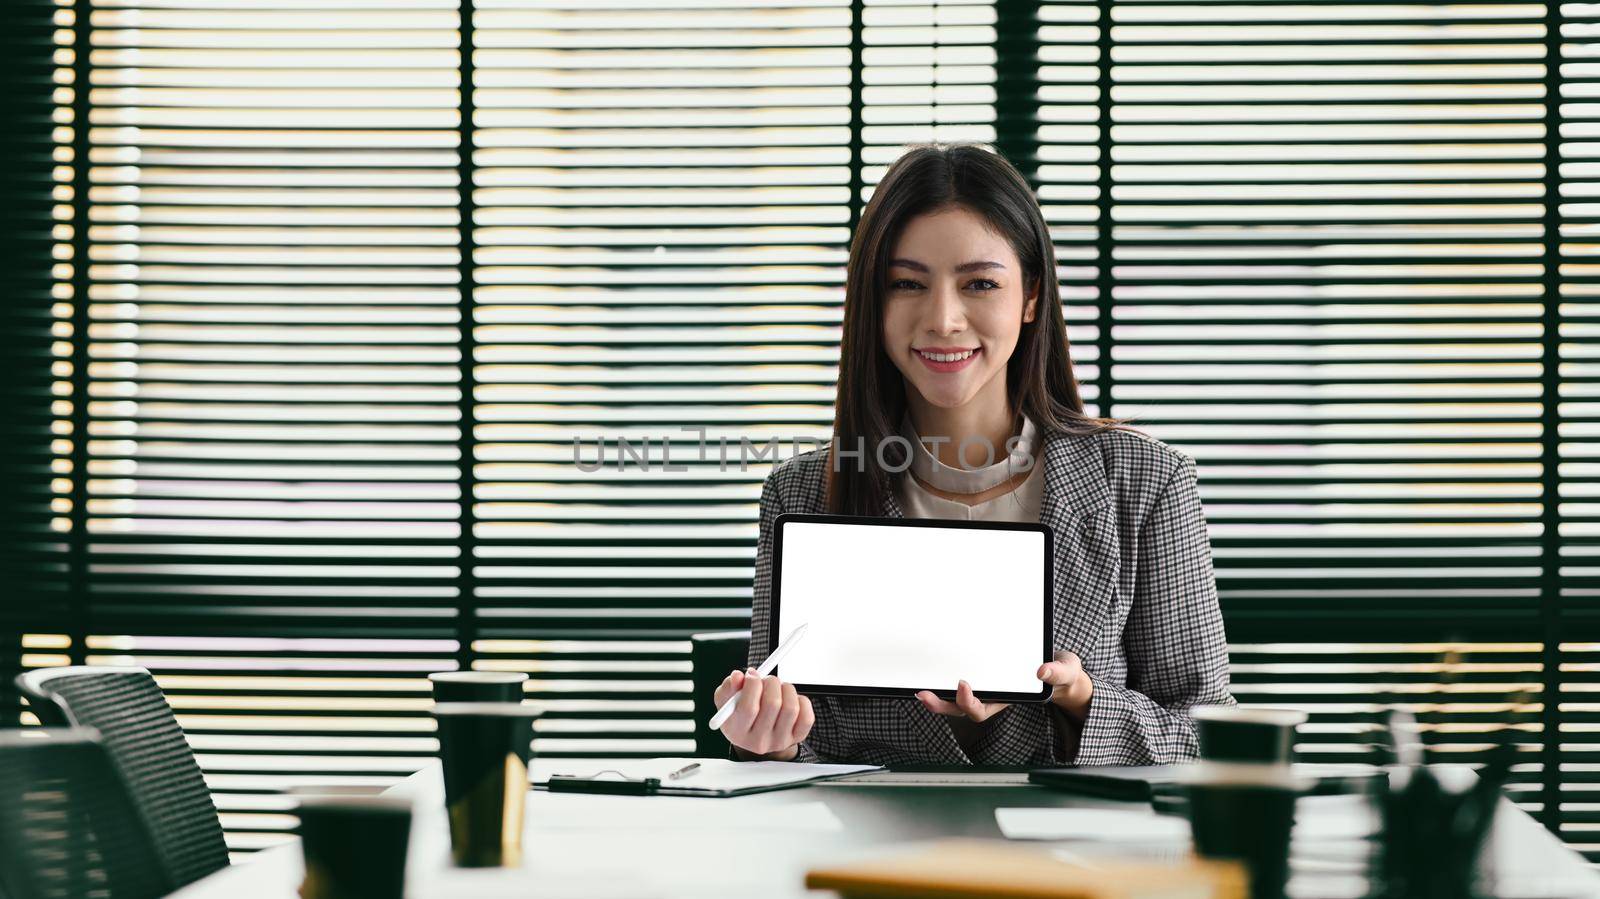 Confident millennial businesswoman in formal suit holding digital tablet and smiling at camera. Blank screen for your advertise text.